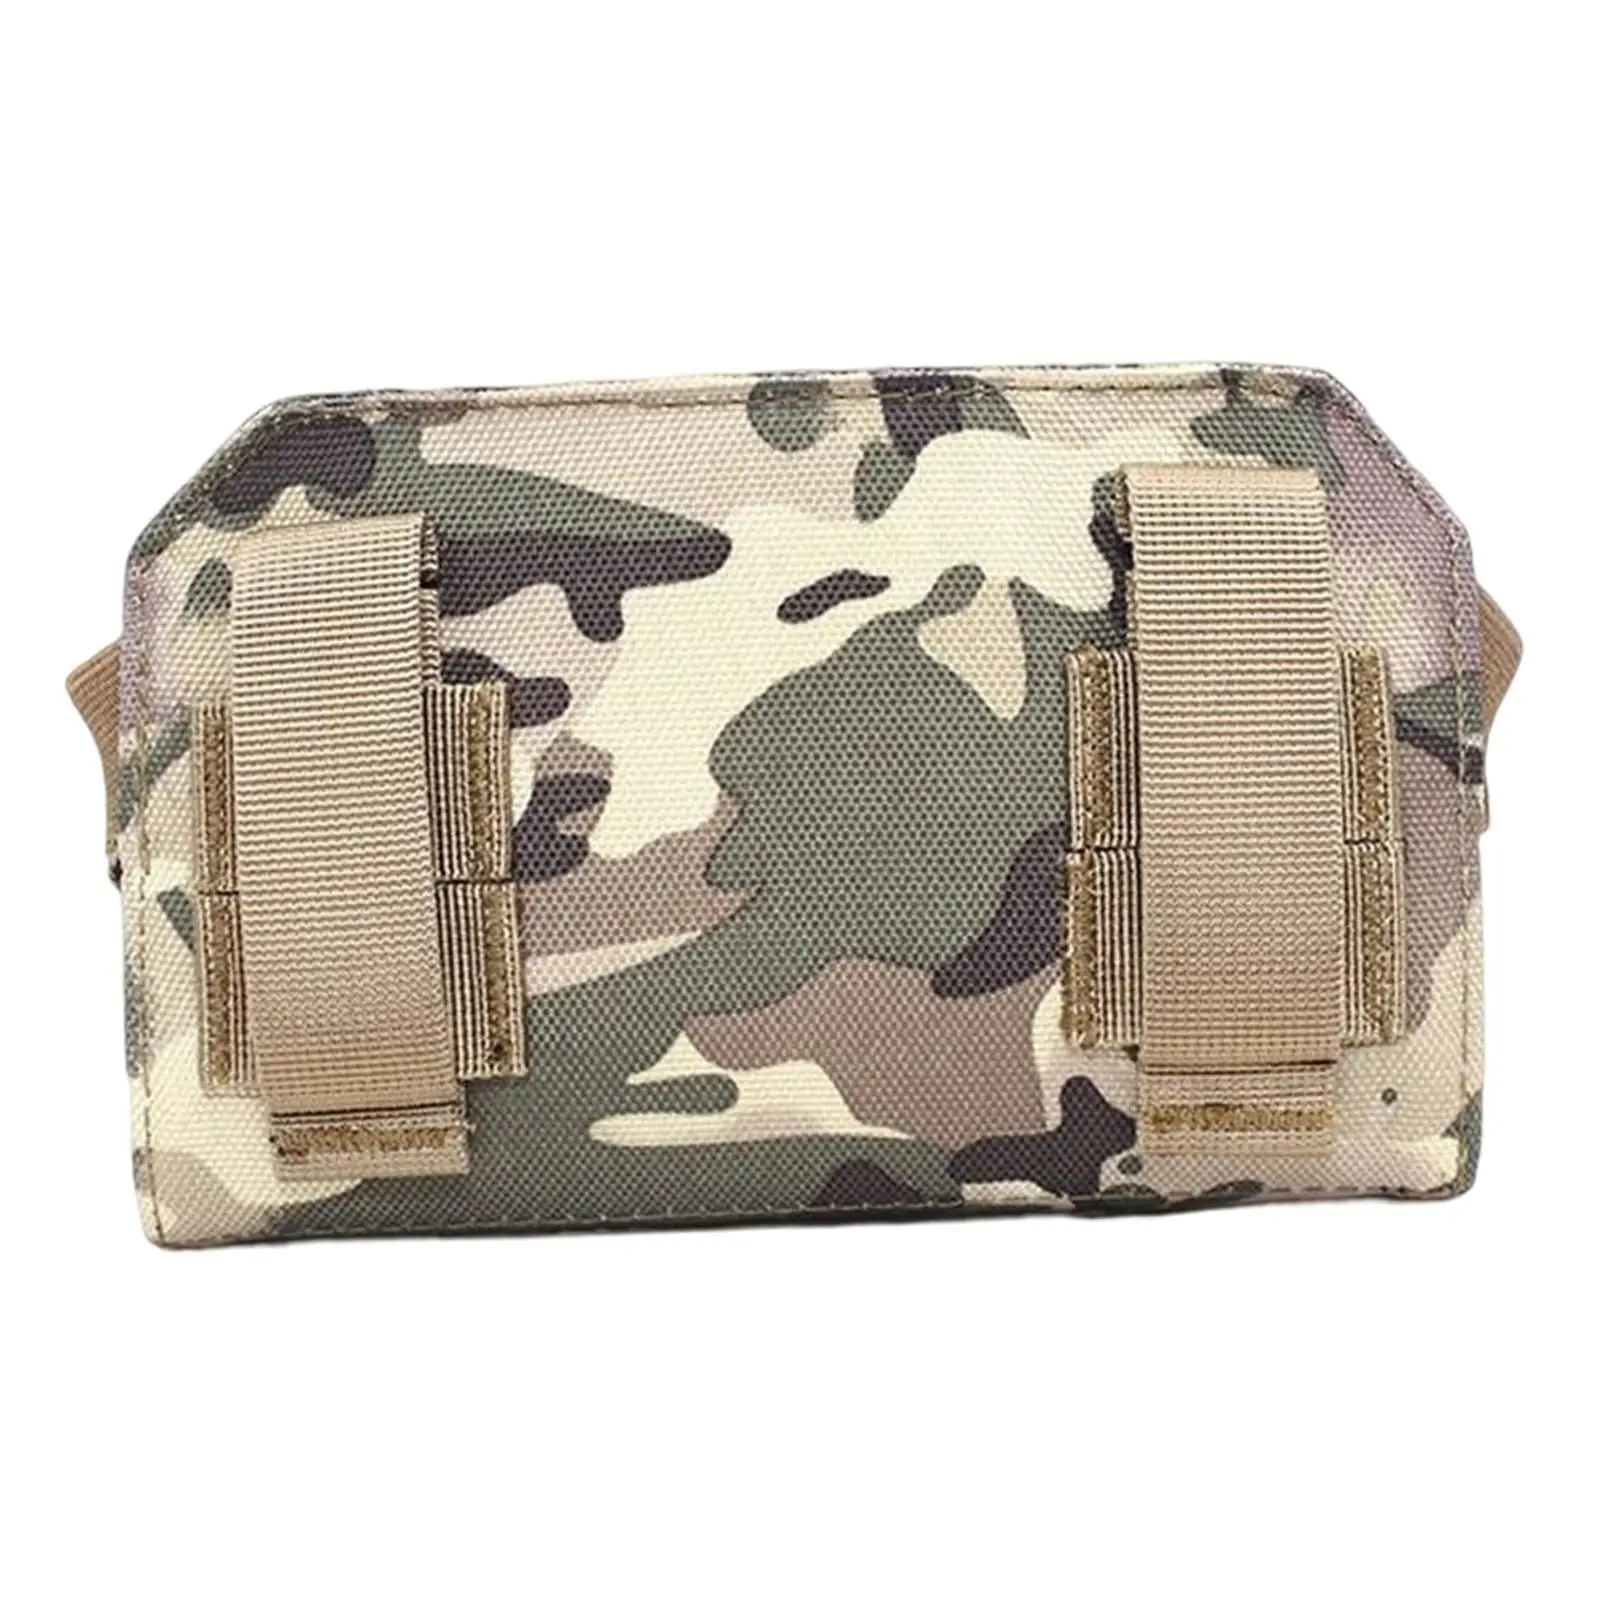 Bag Bag Pouch Purse for Hunting Hiking